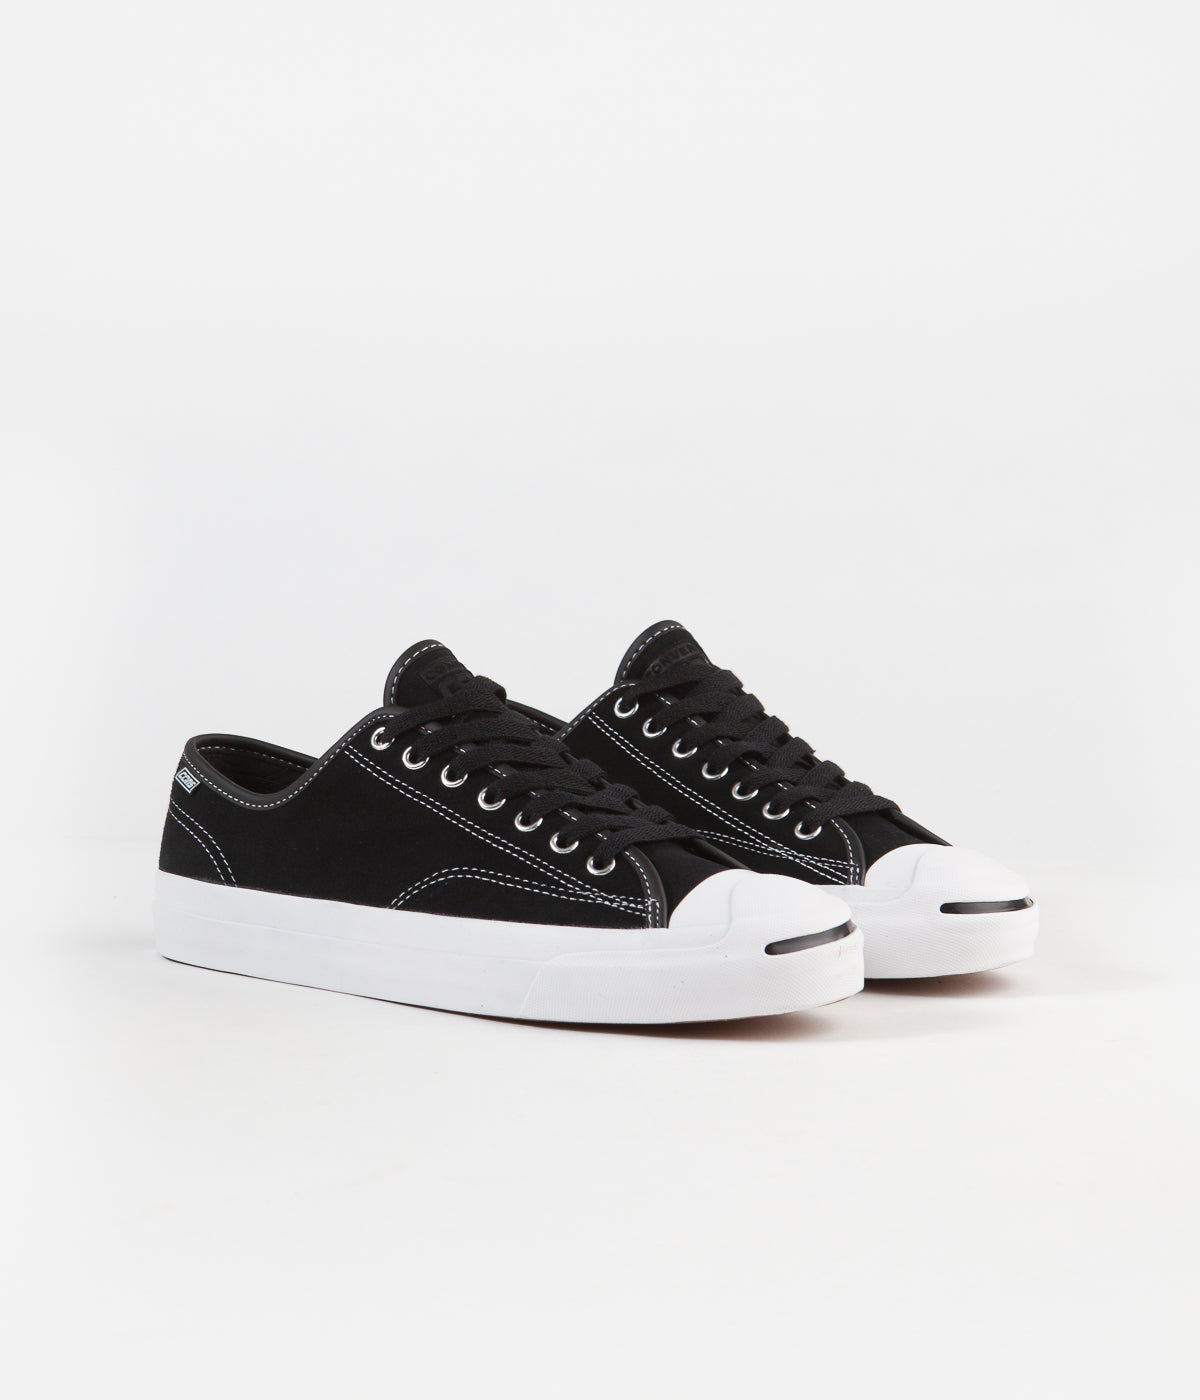 converse jack purcell black high